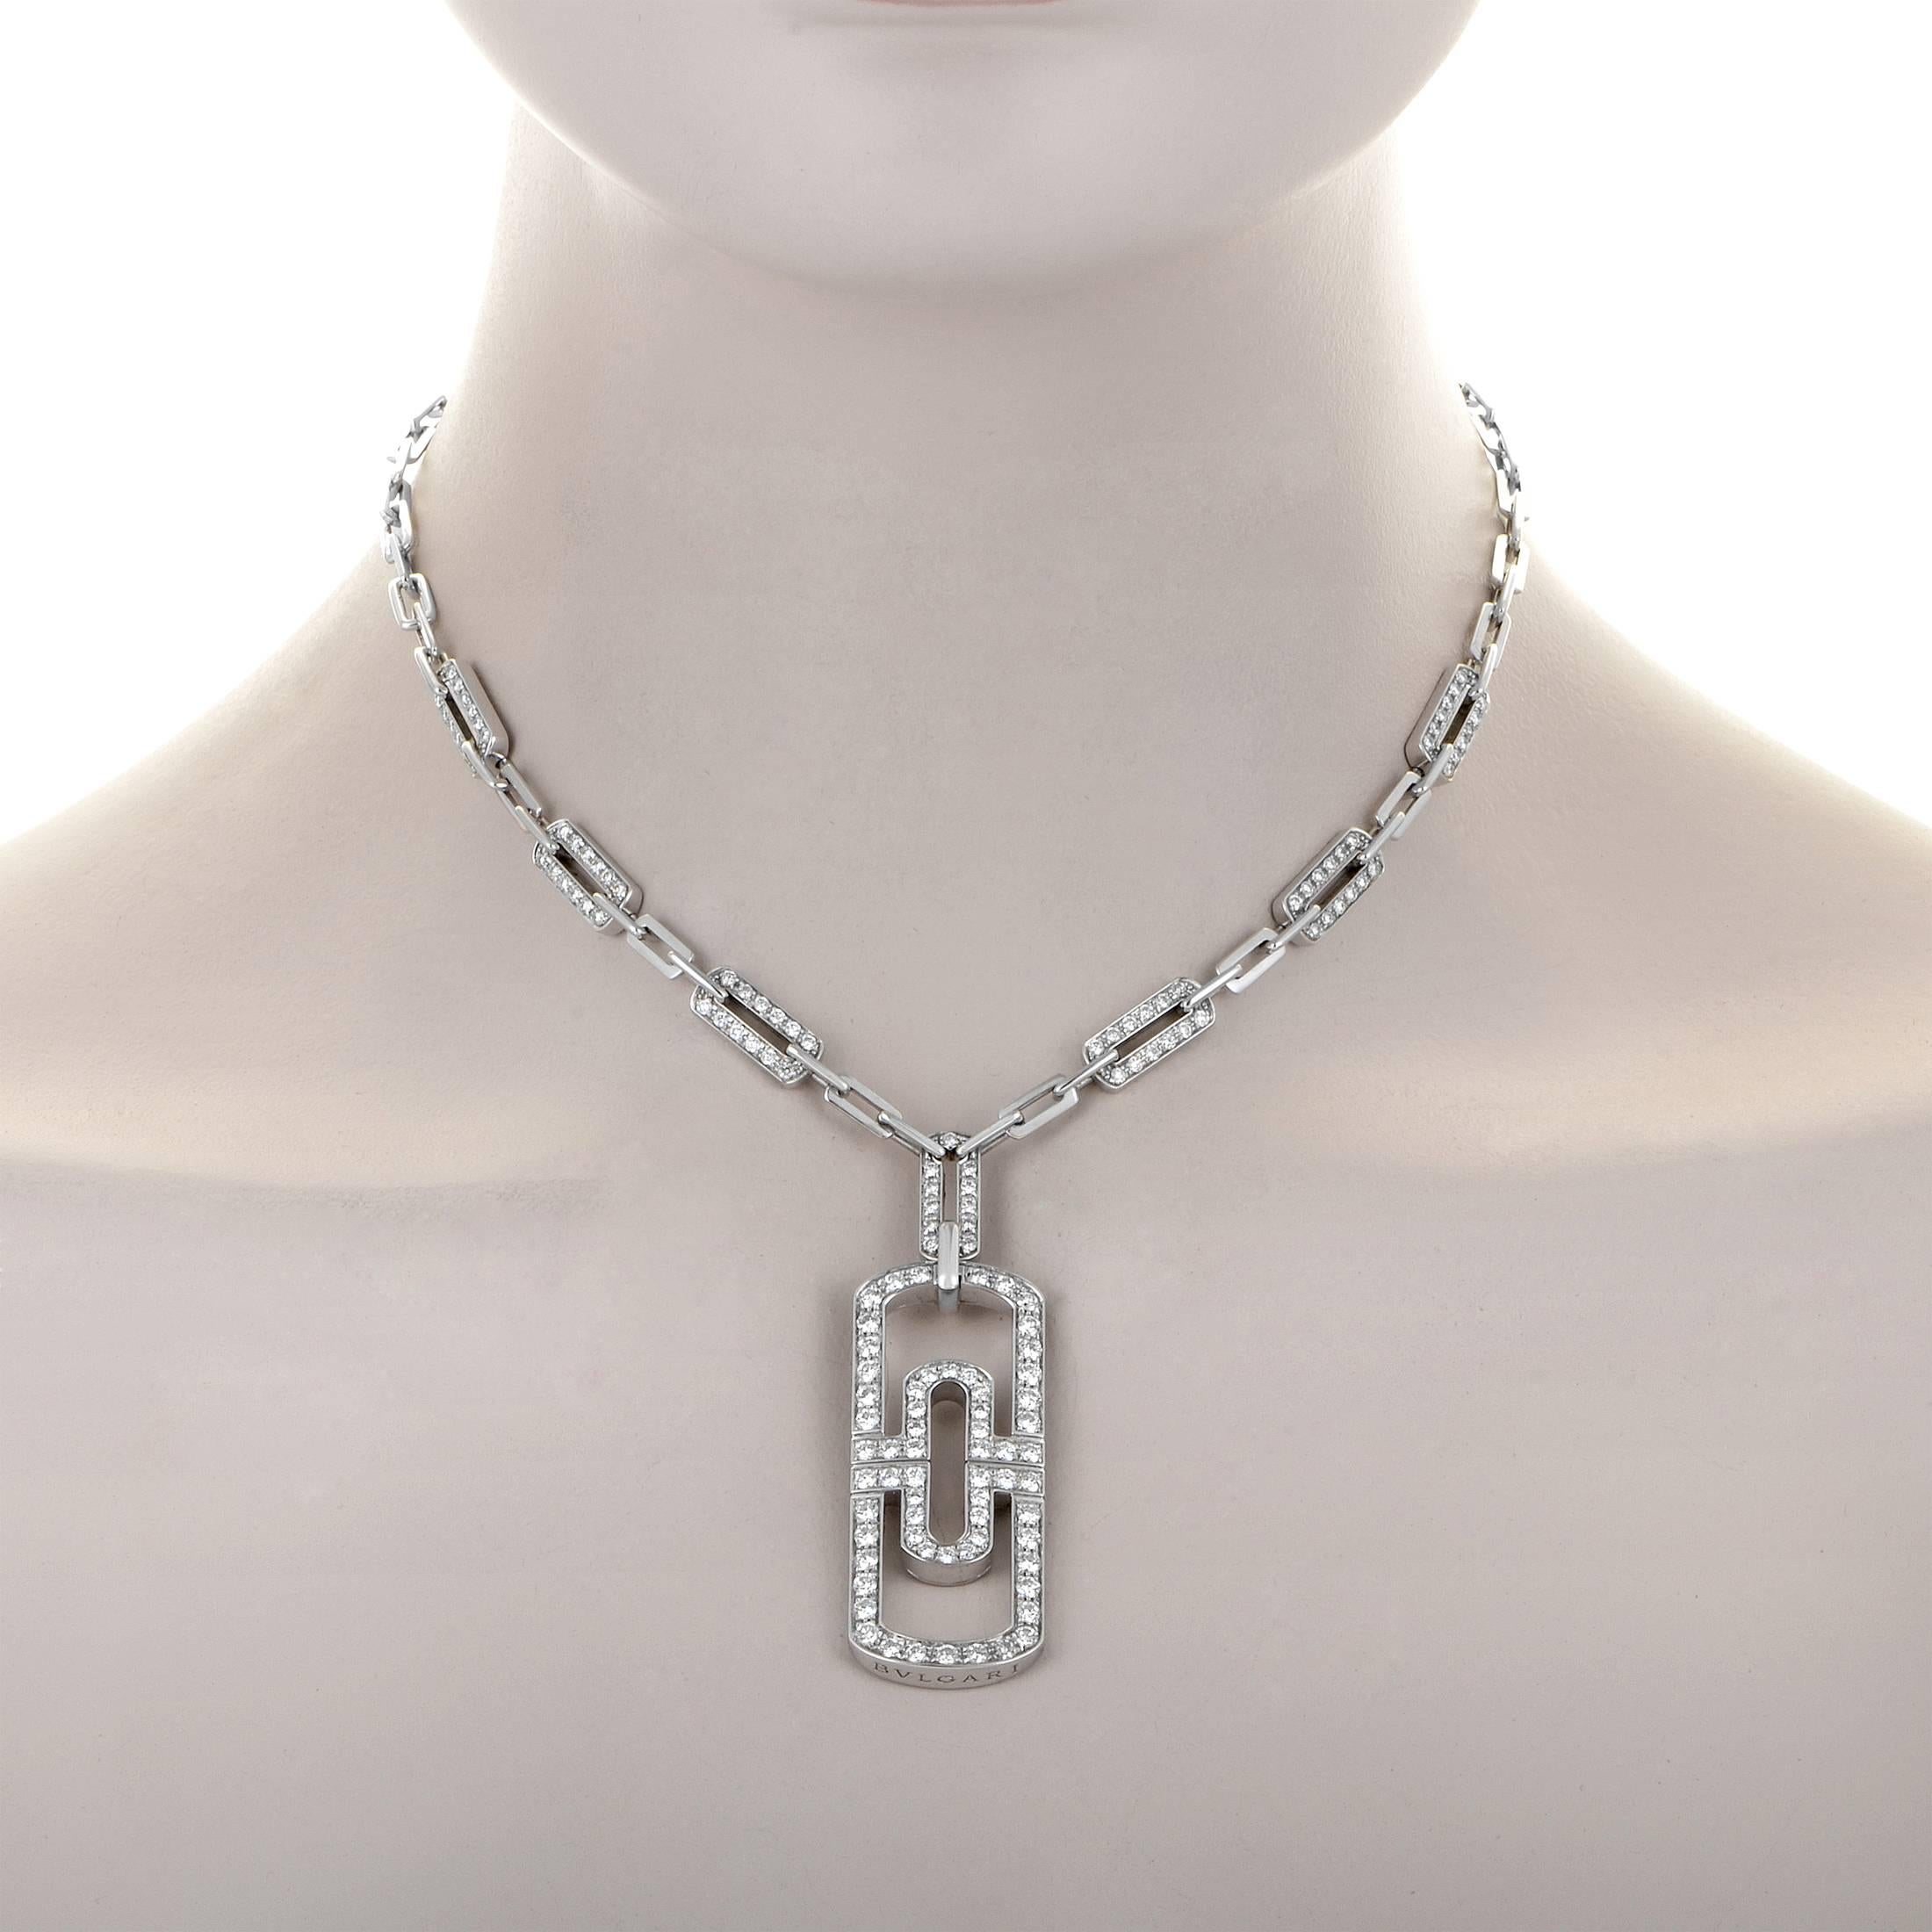 This authentic design from Bulgari's Parentesi collection is perfect for the lady who loves to shine! The necklace is made of 18K white gold and boasts a large pendant that features the Parentesi design. Lastly, the necklace and pendant are set with